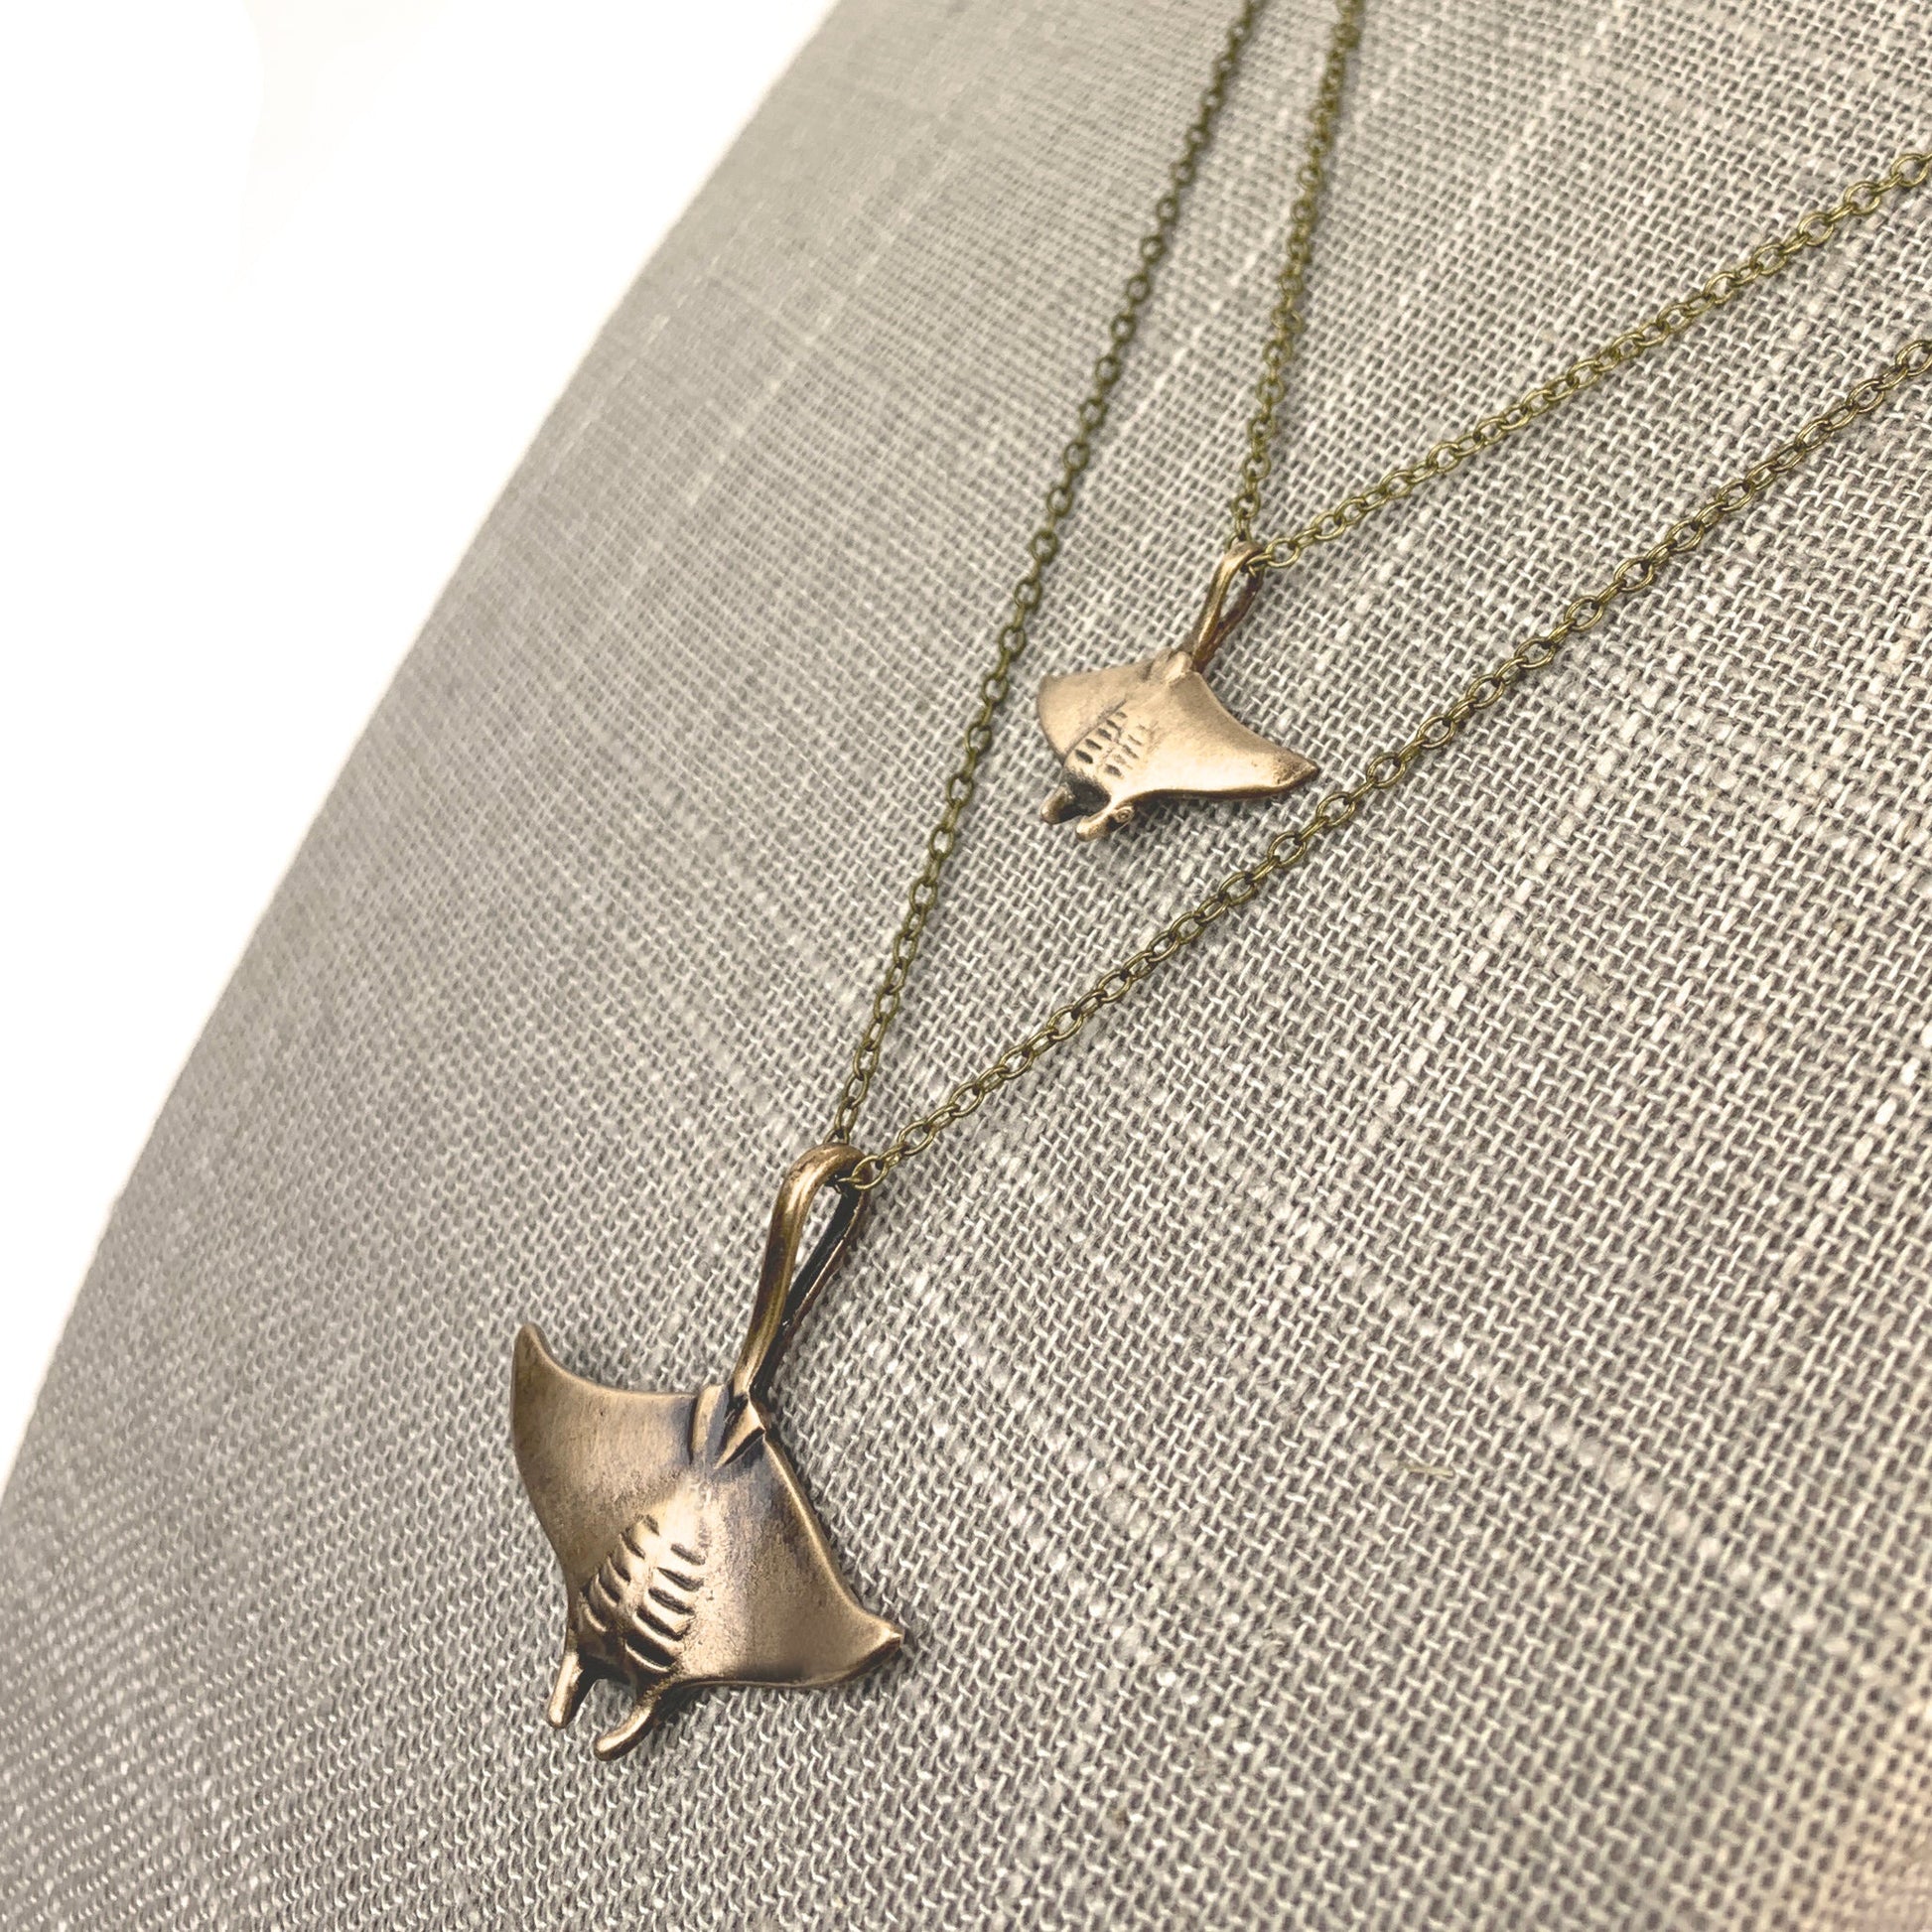 Boho Manta Ray Necklace for Women- Bronze Beachy Boho Necklace, Layered Manta Ray Necklace, Sea Life Gifts, Bronze Stingray, Brown Manta Ray Necklace - The Tool Store